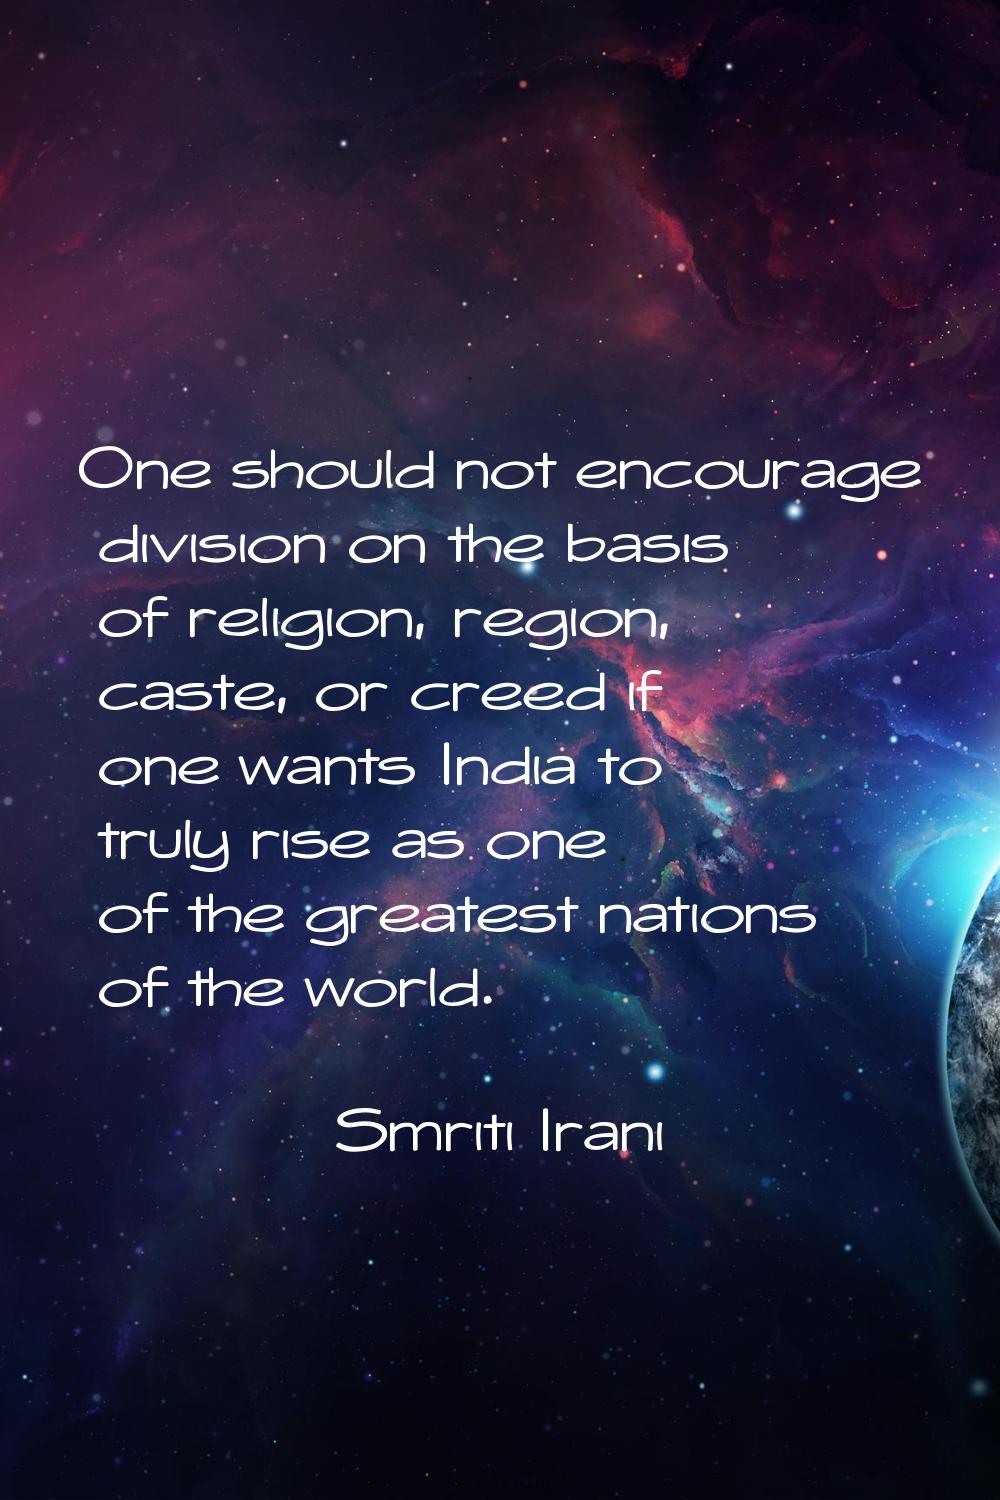 One should not encourage division on the basis of religion, region, caste, or creed if one wants In